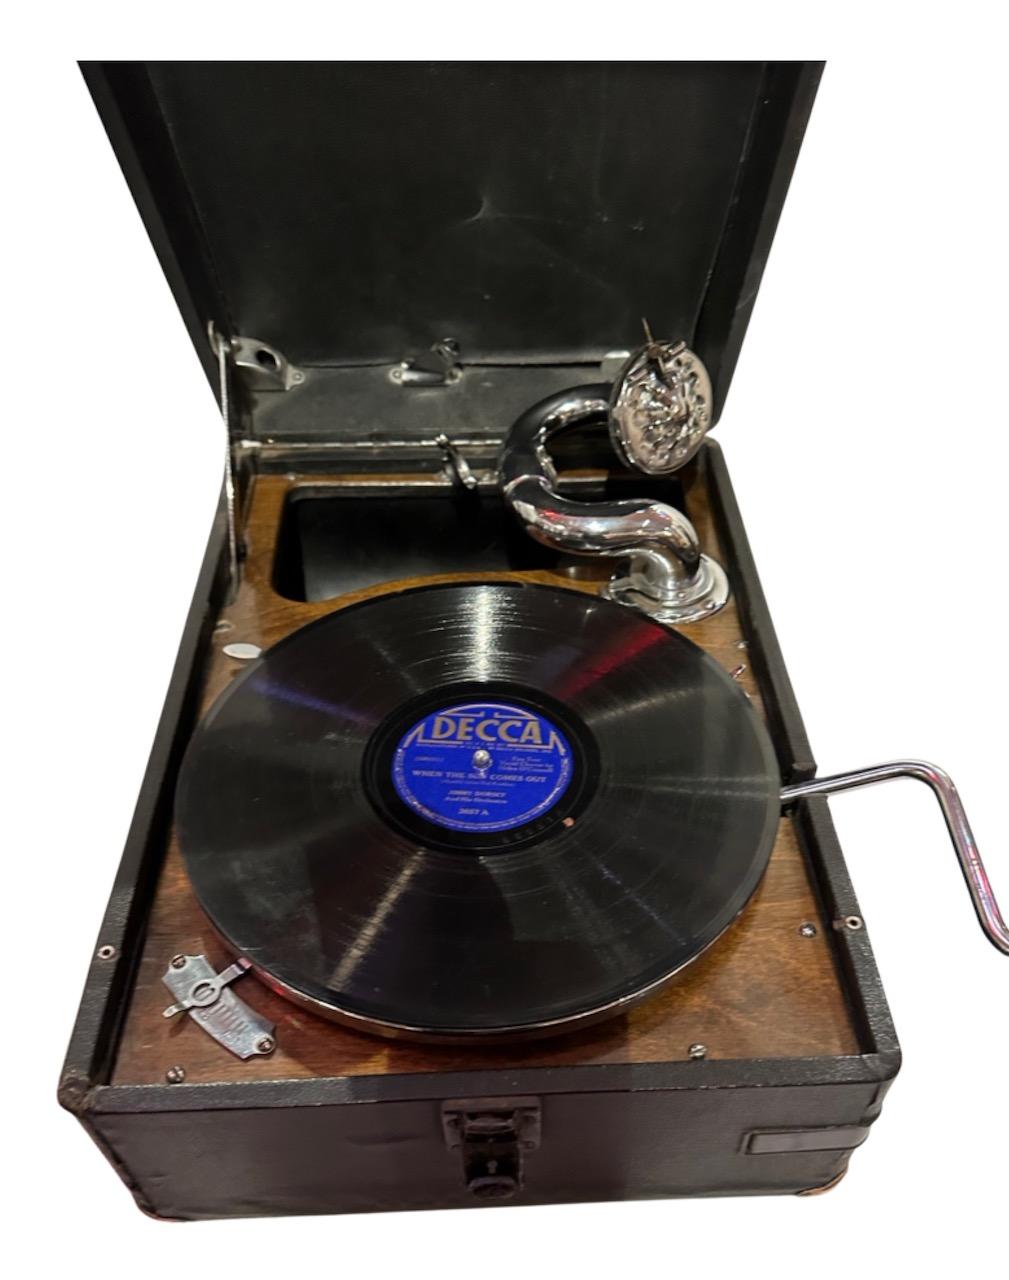 1930 Portable Gramophone his master’s voice original covered finish. This 1930 Portable Gramophone is the real deal. It’s an HMV Model 101, part of a small collection of such classic sound machines which have been restored. The outside and inside